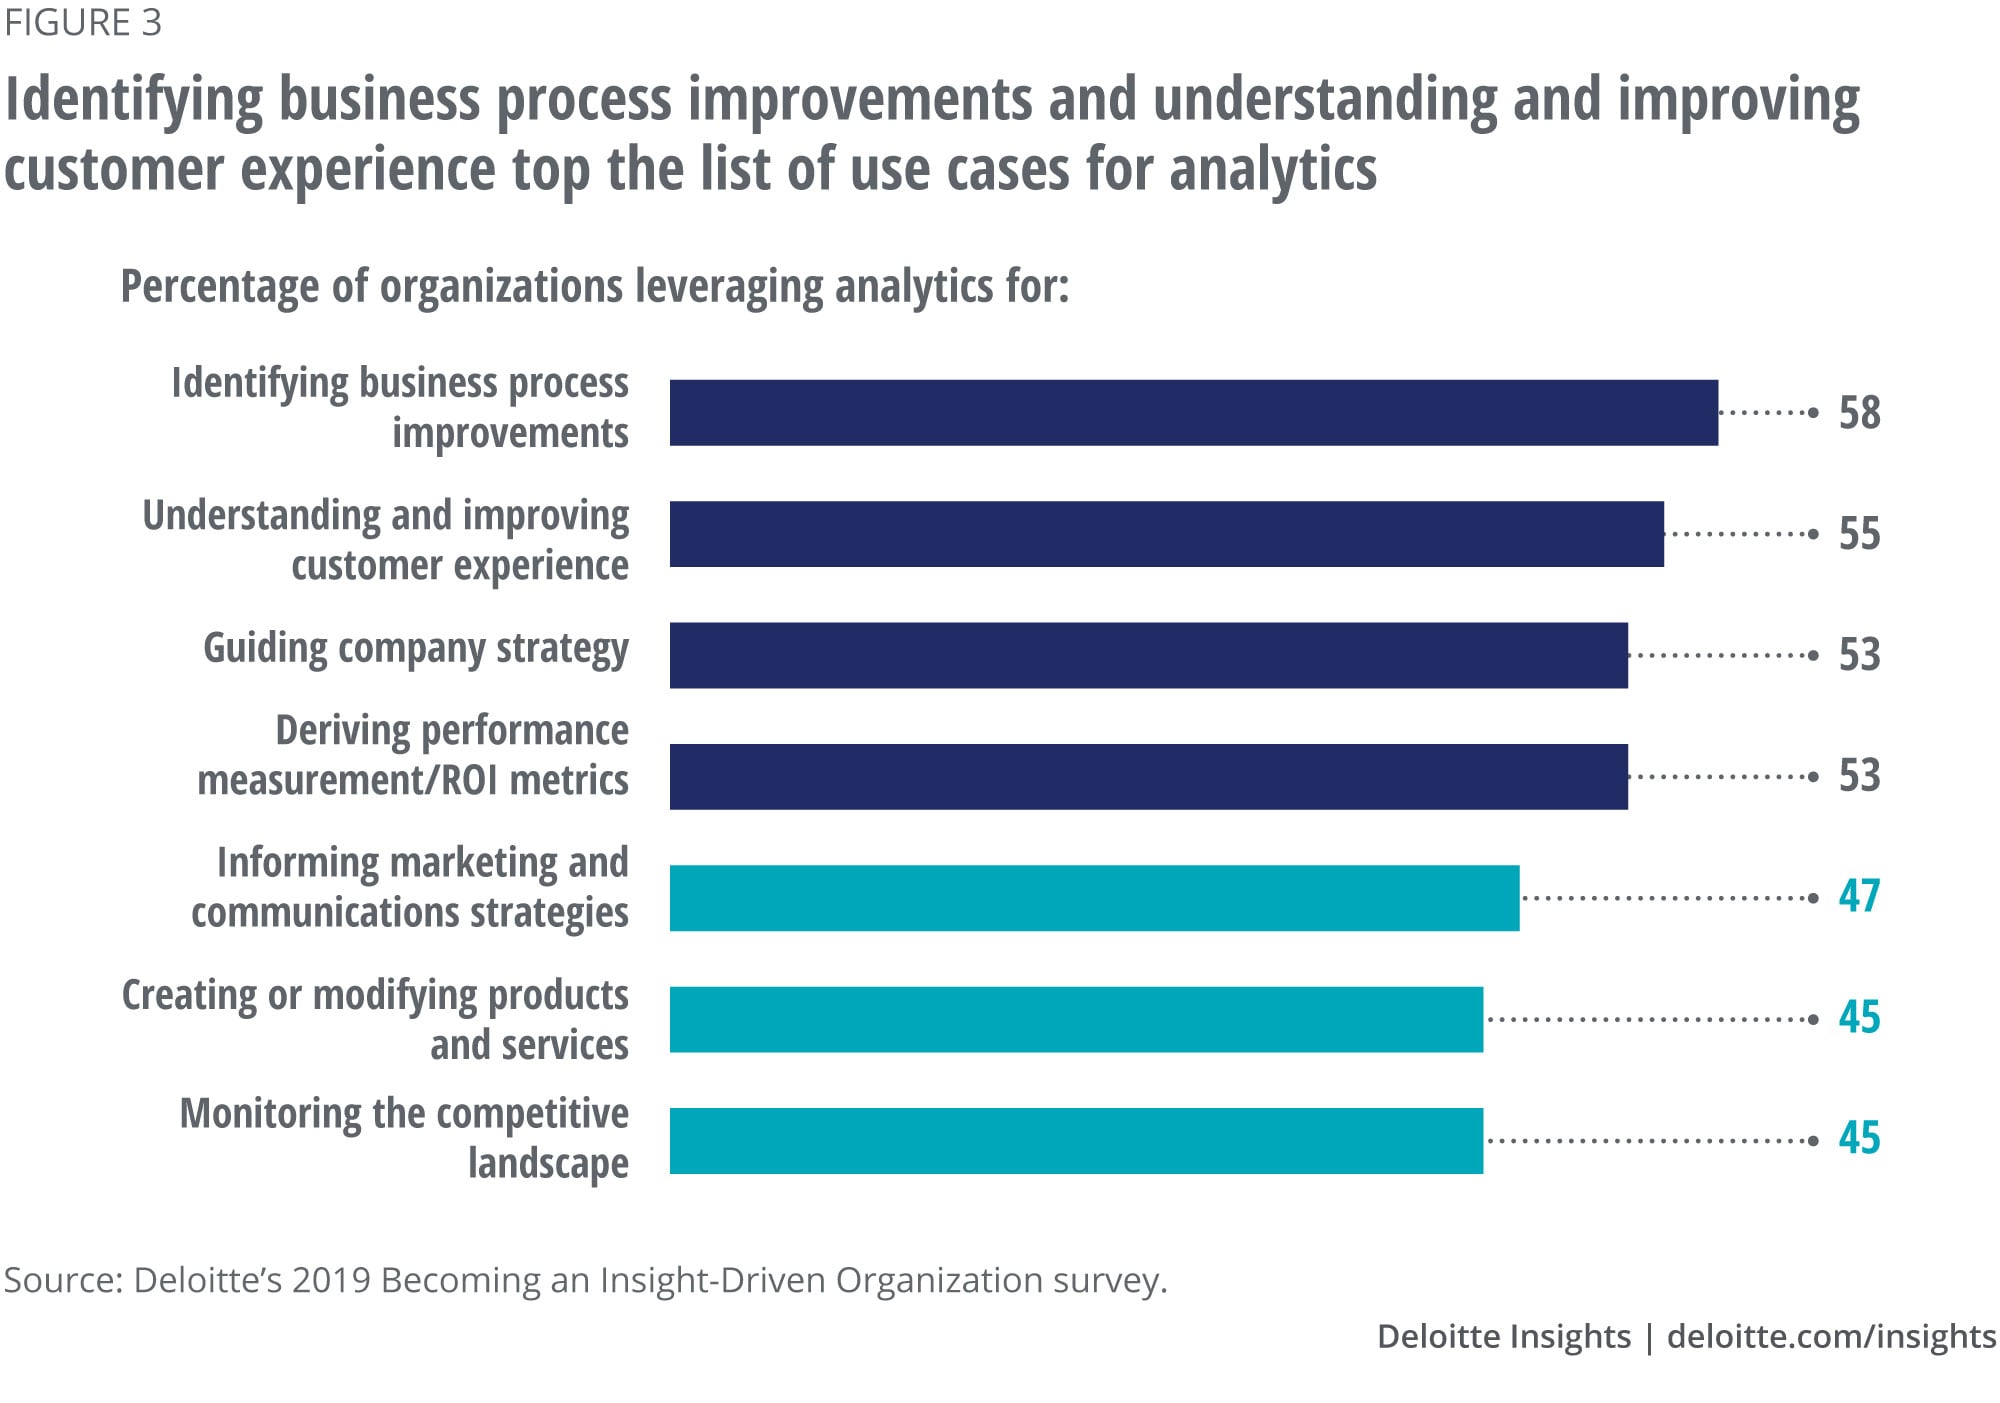 Identifying business process improvements and understanding and improving customer experience top the list of use cases for analytics